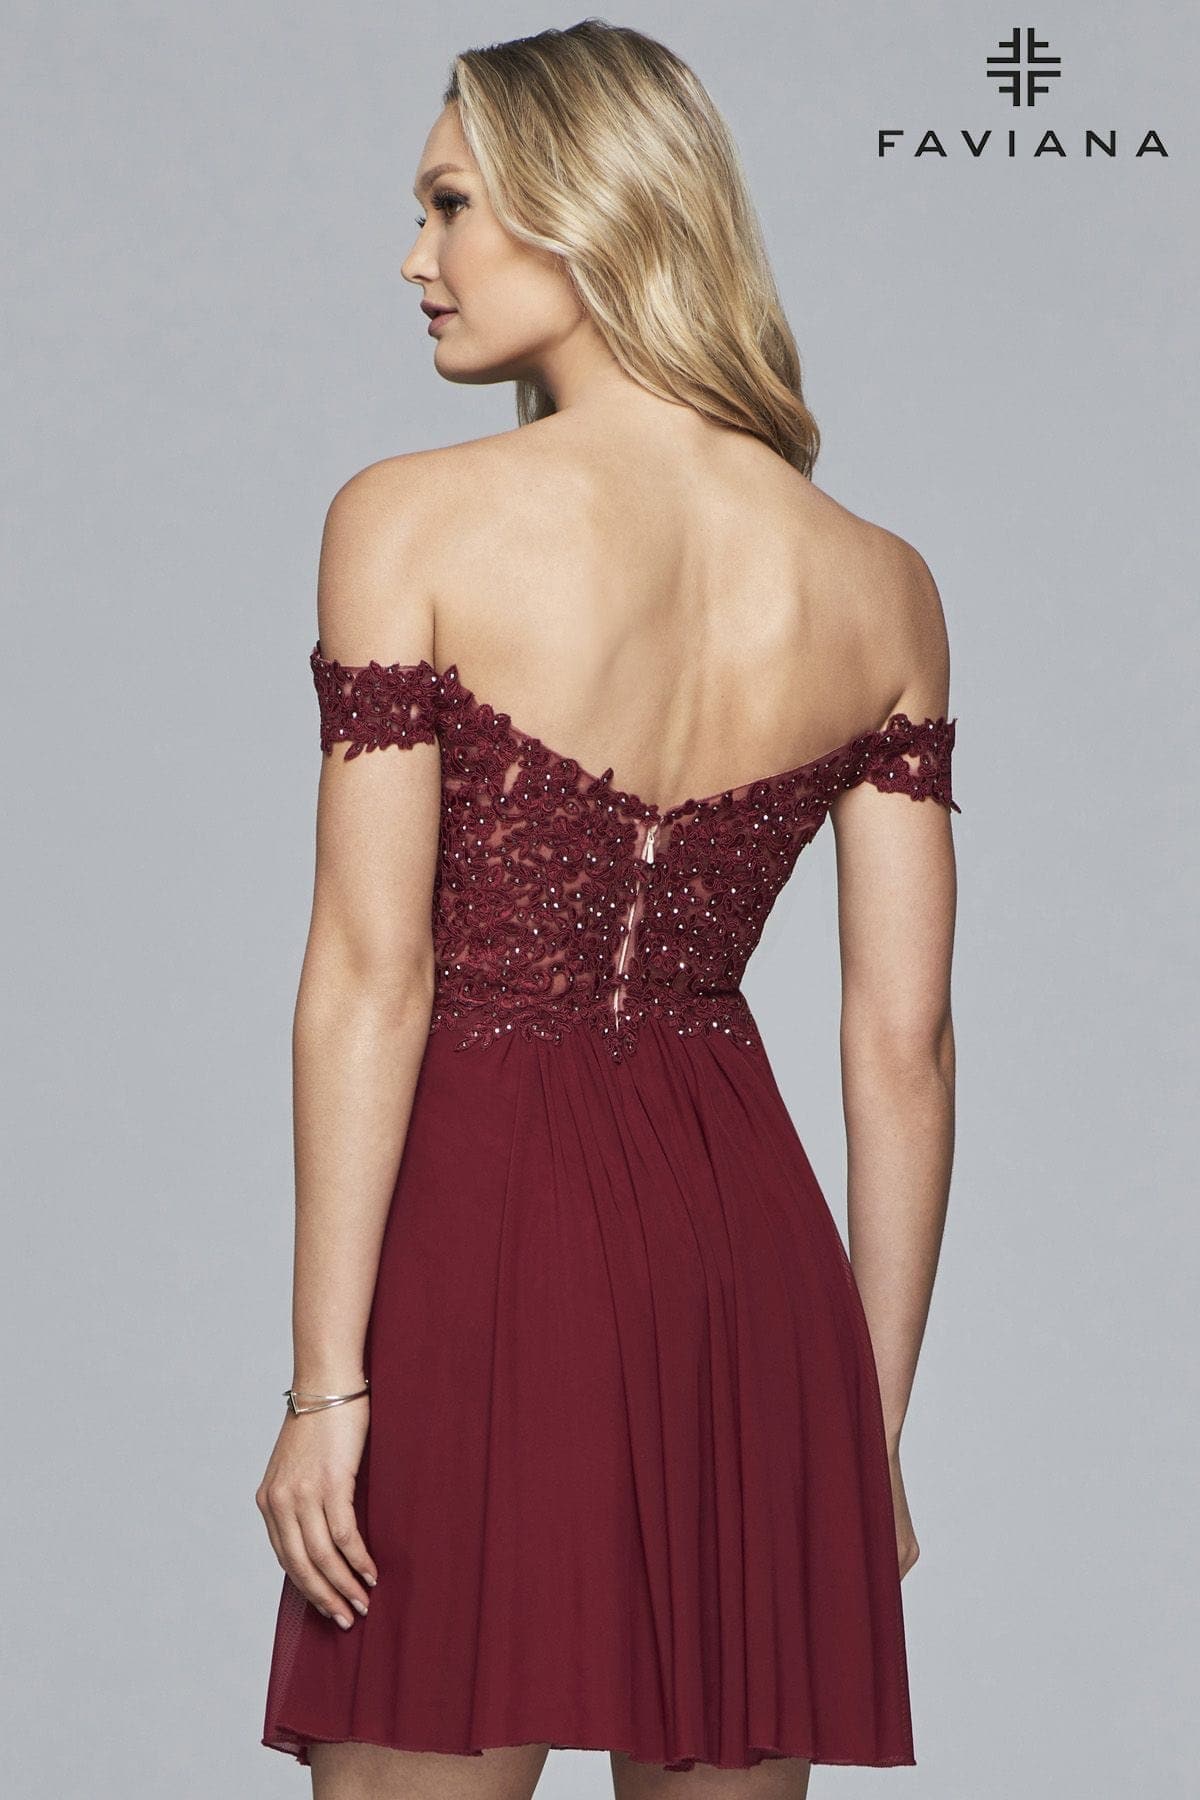 Off The Shoulder Short Dress WIth Lace Bodice